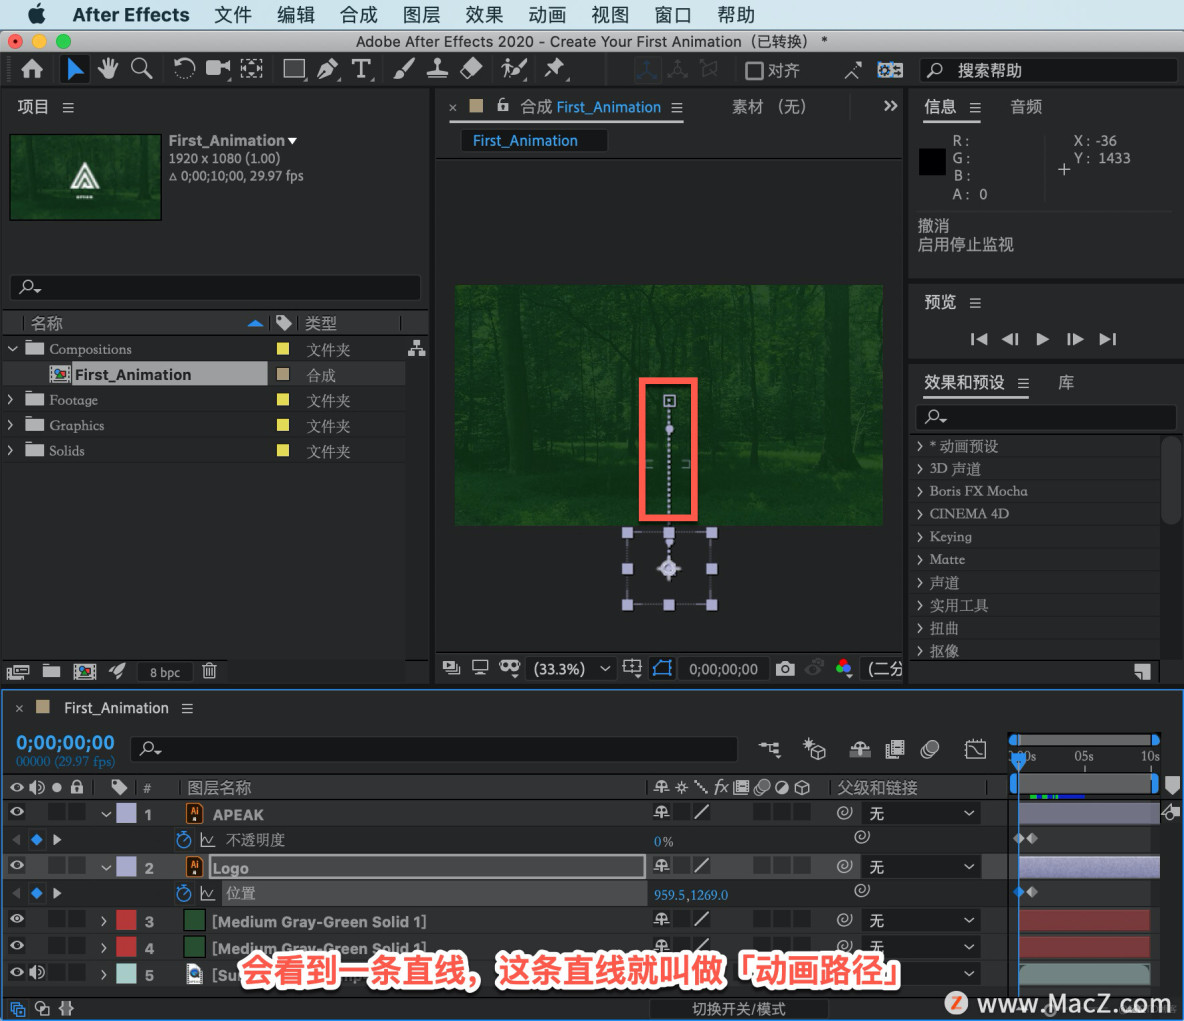 After Effects 教程，如何在 After Effects 中创建动画？_After Effects_06